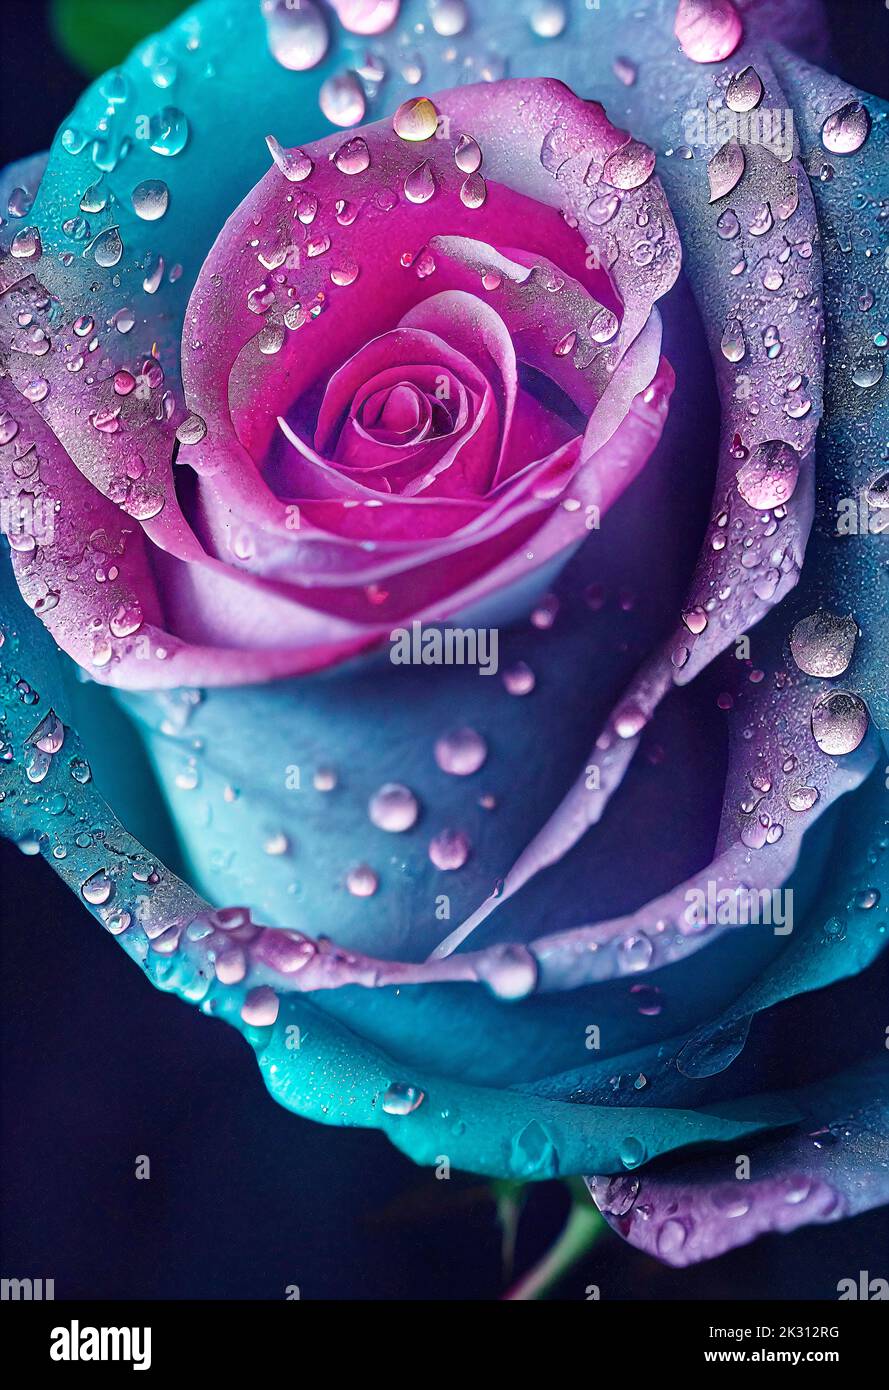 Head of blue and pink rose covered in raindrops Stock Photo